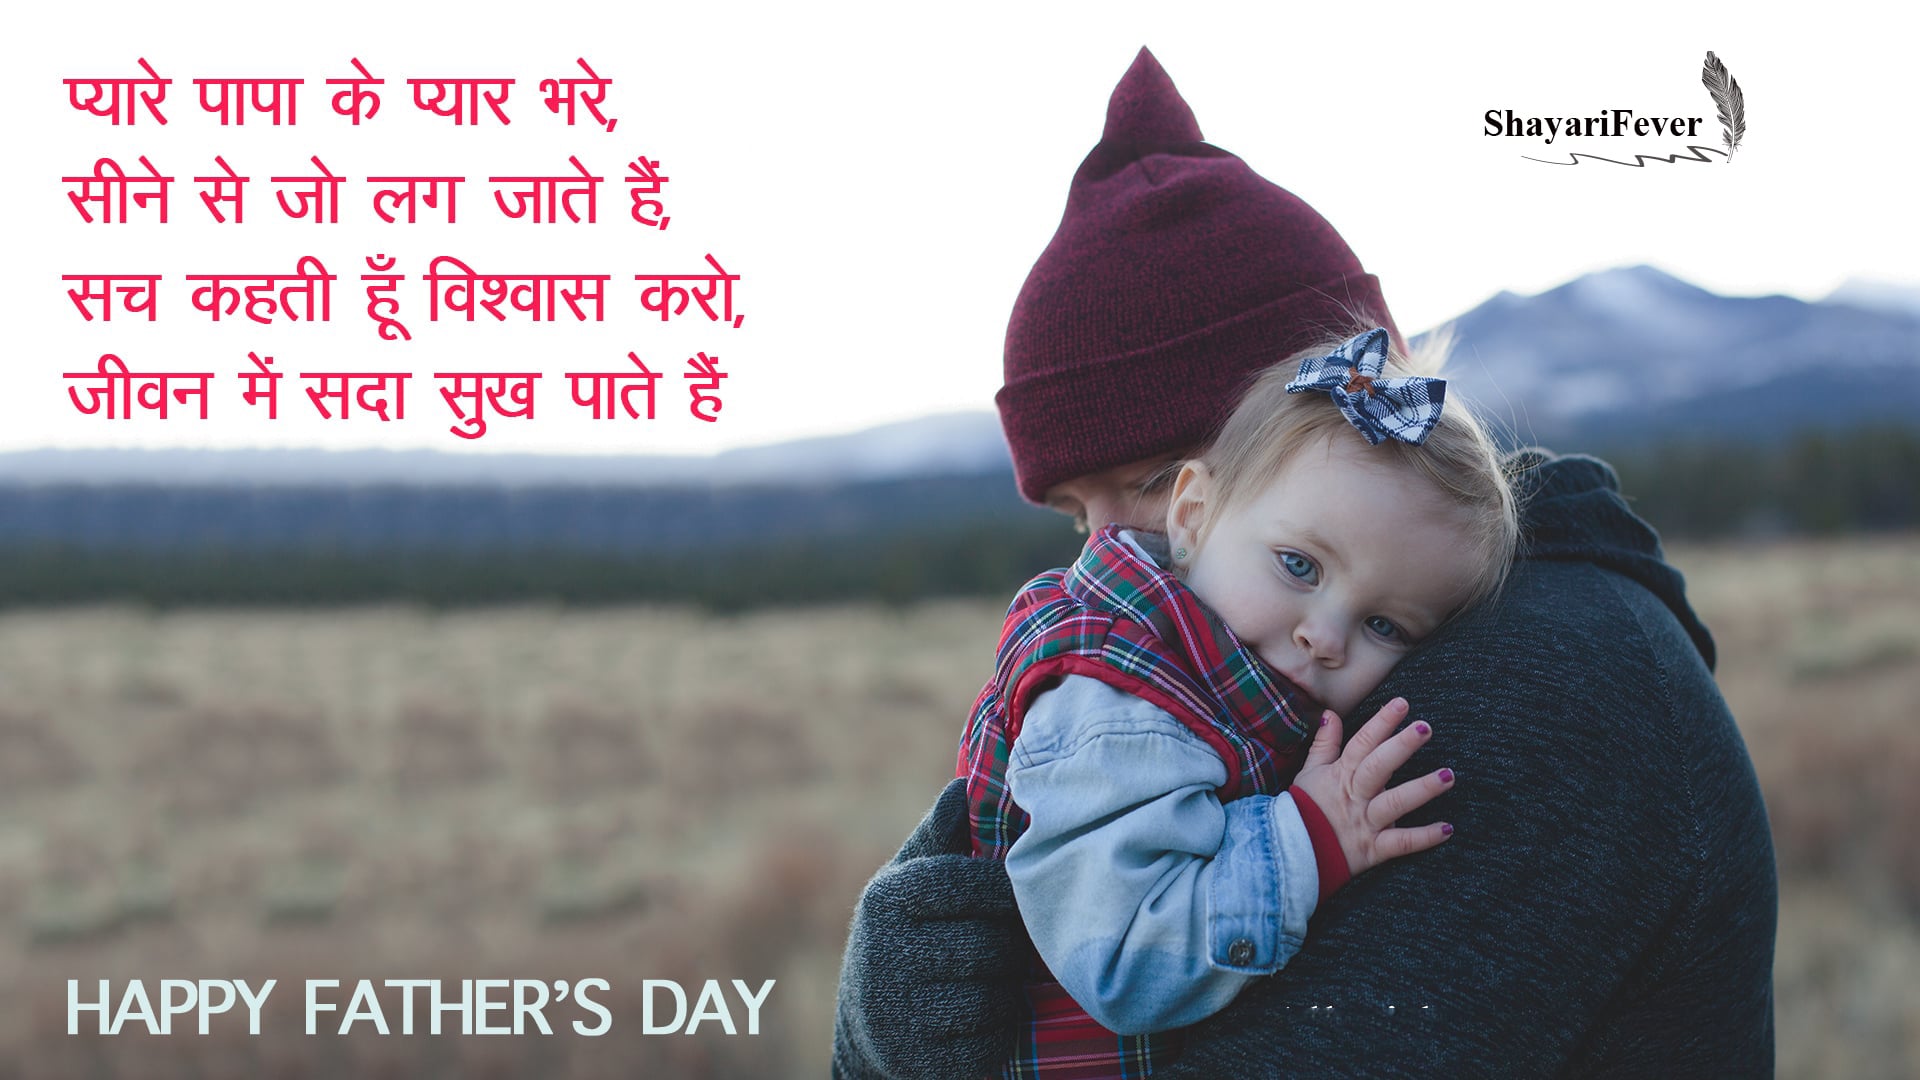 special fathers day images quotes